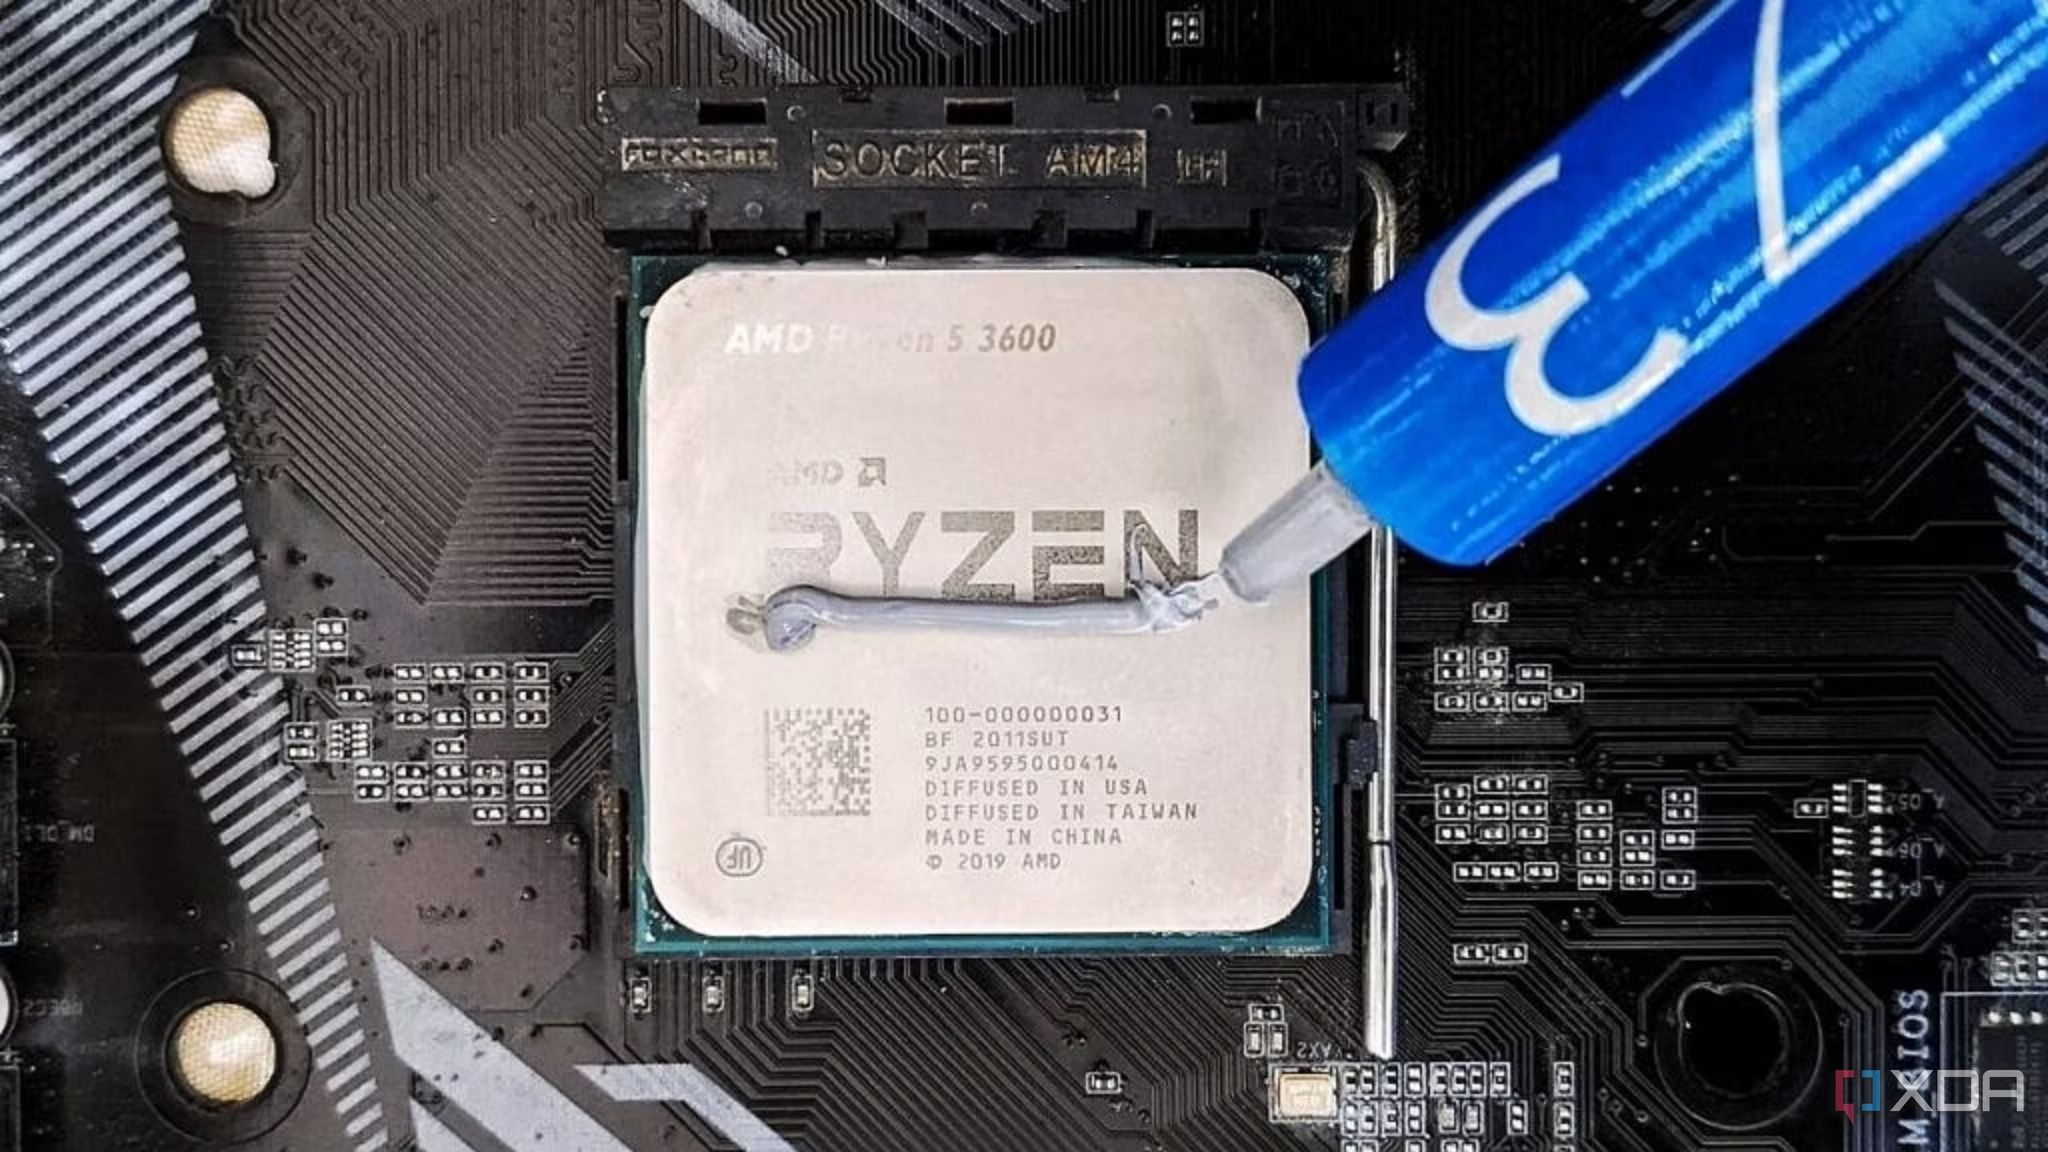 How to apply thermal paste